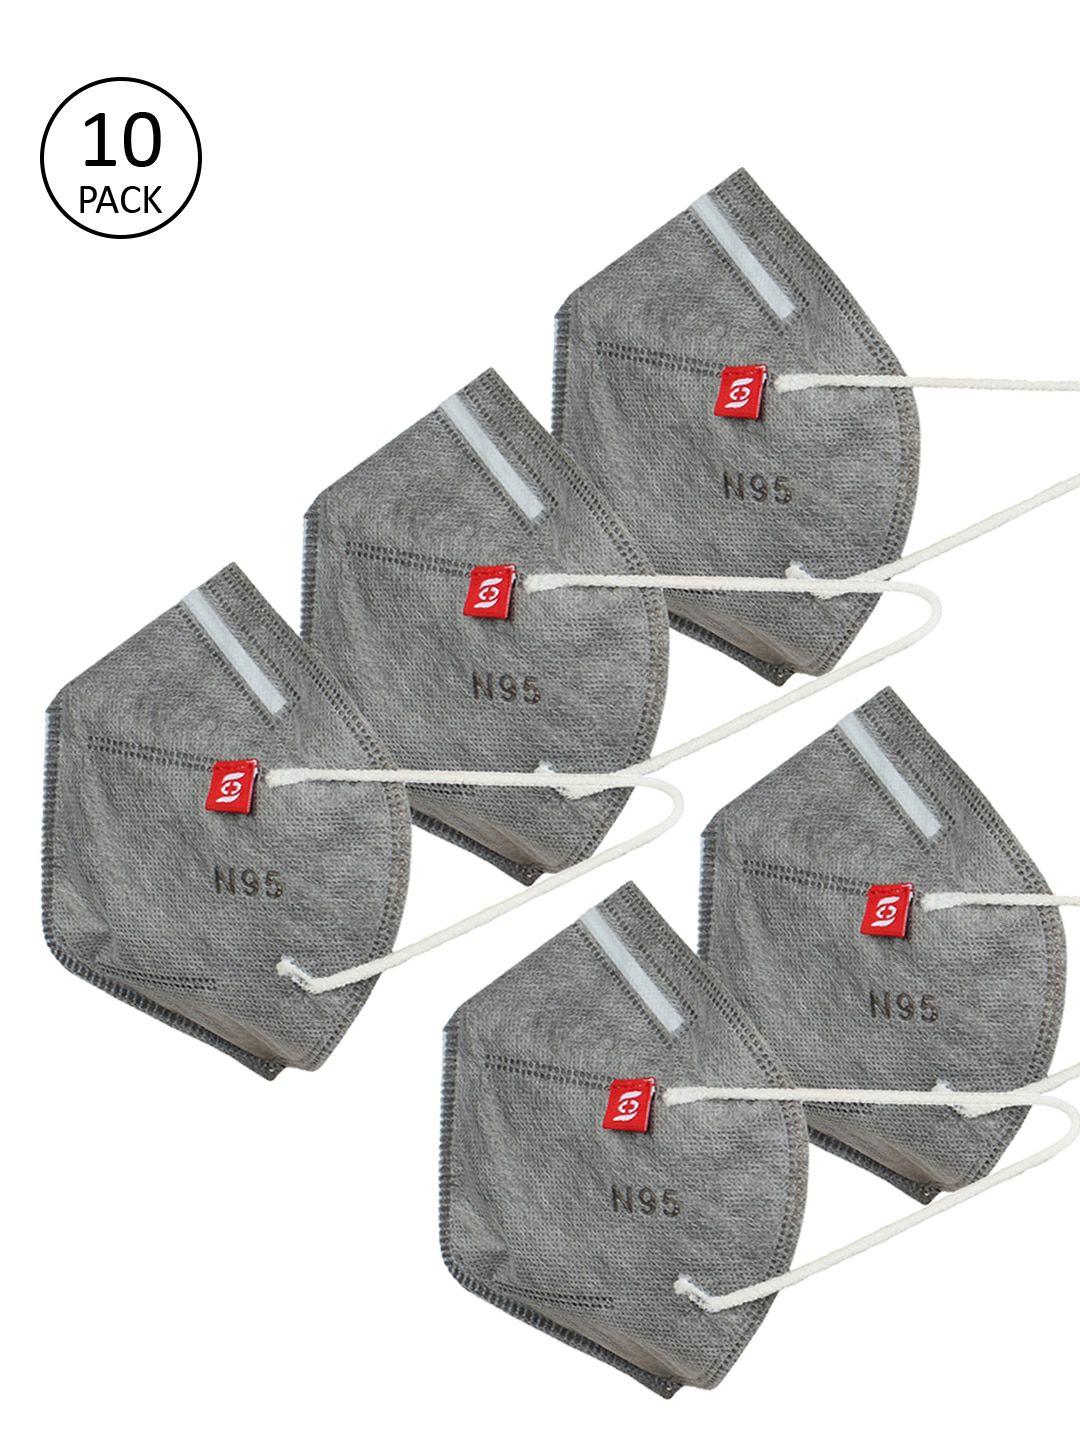 swiss design unisex grey pack of 10 5ply anti-pollution n95 masks